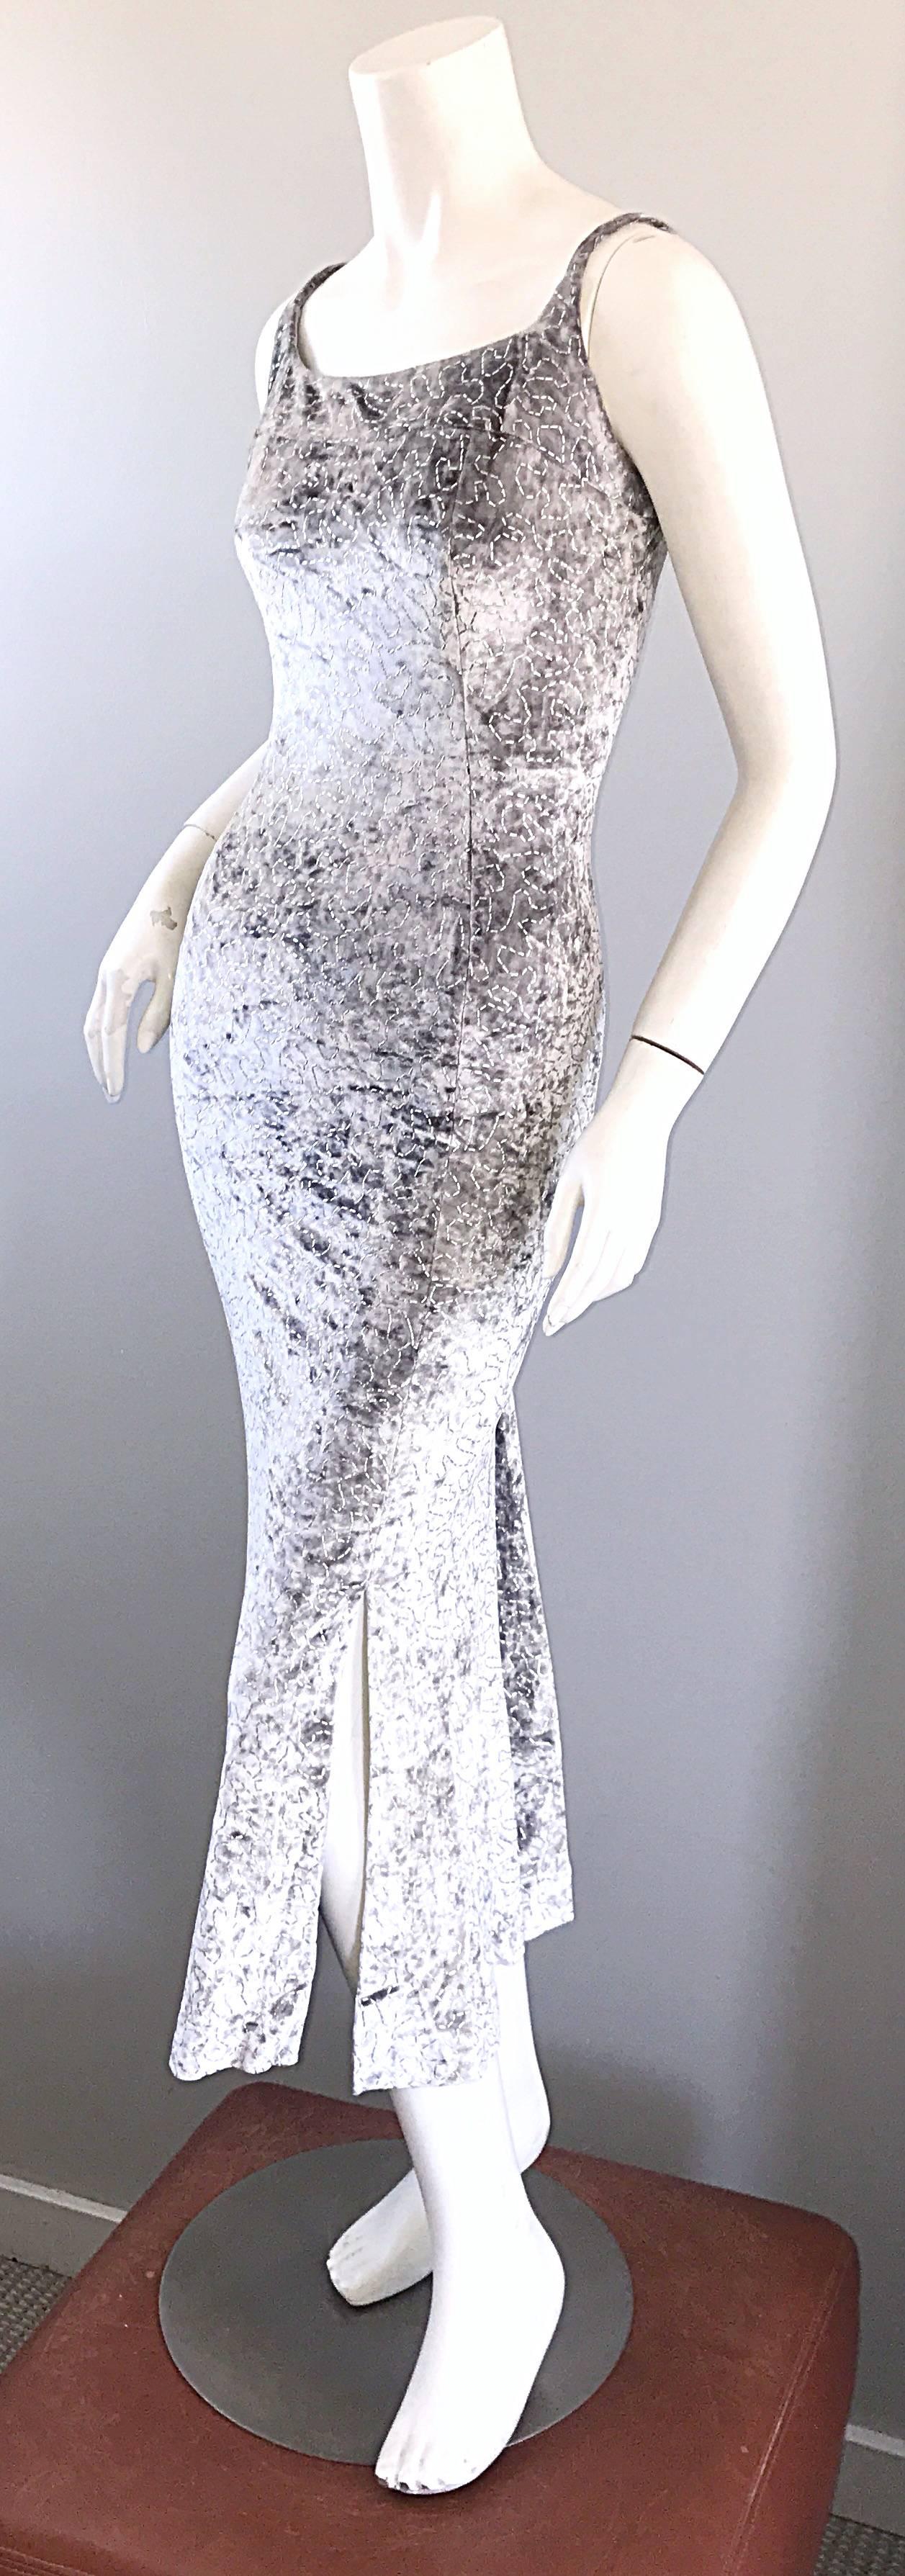 1990s Janine of London Lillie Rubin Silver Grey Metallic Crushed Velvet Dress  In Excellent Condition For Sale In San Diego, CA